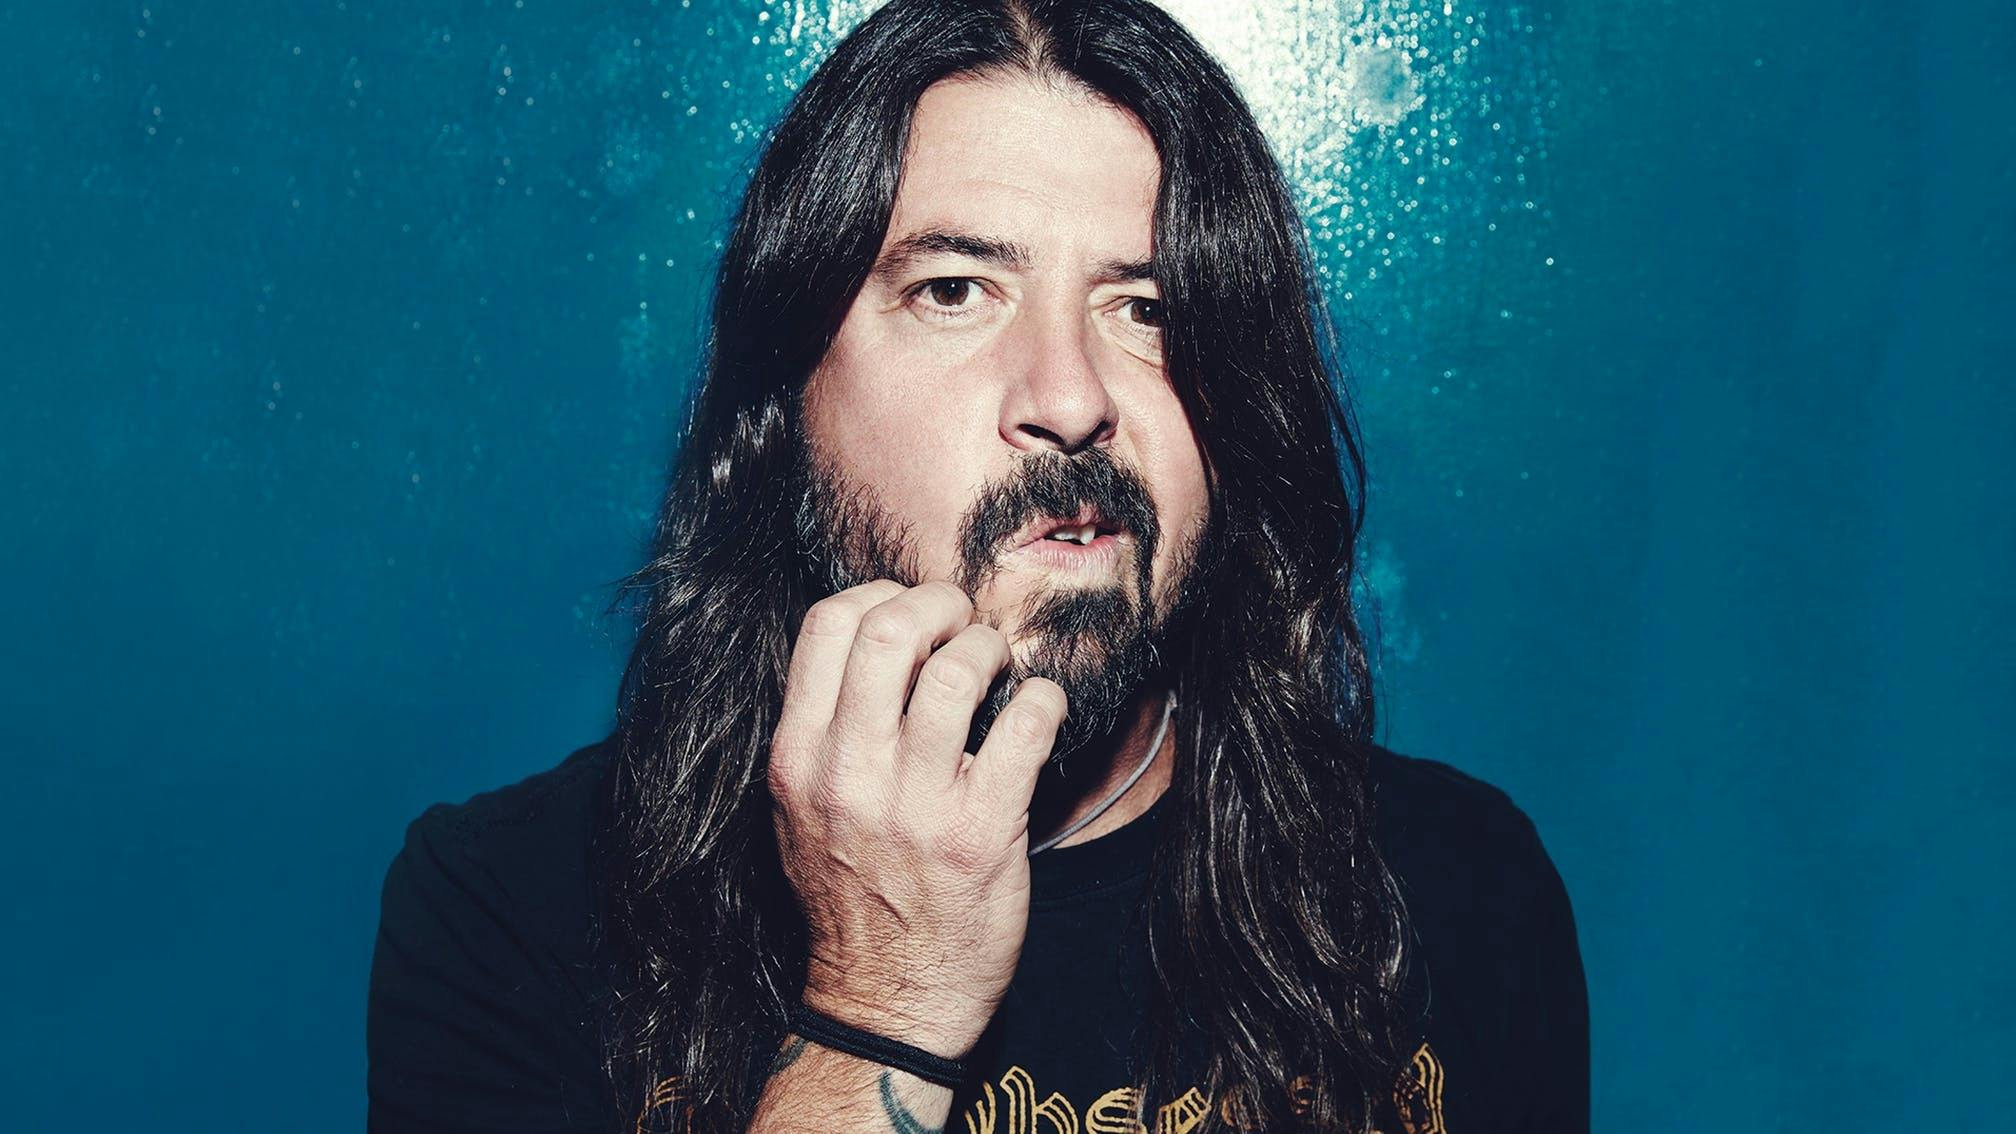 Dave Grohl shares excerpt from upcoming book, The Storyteller